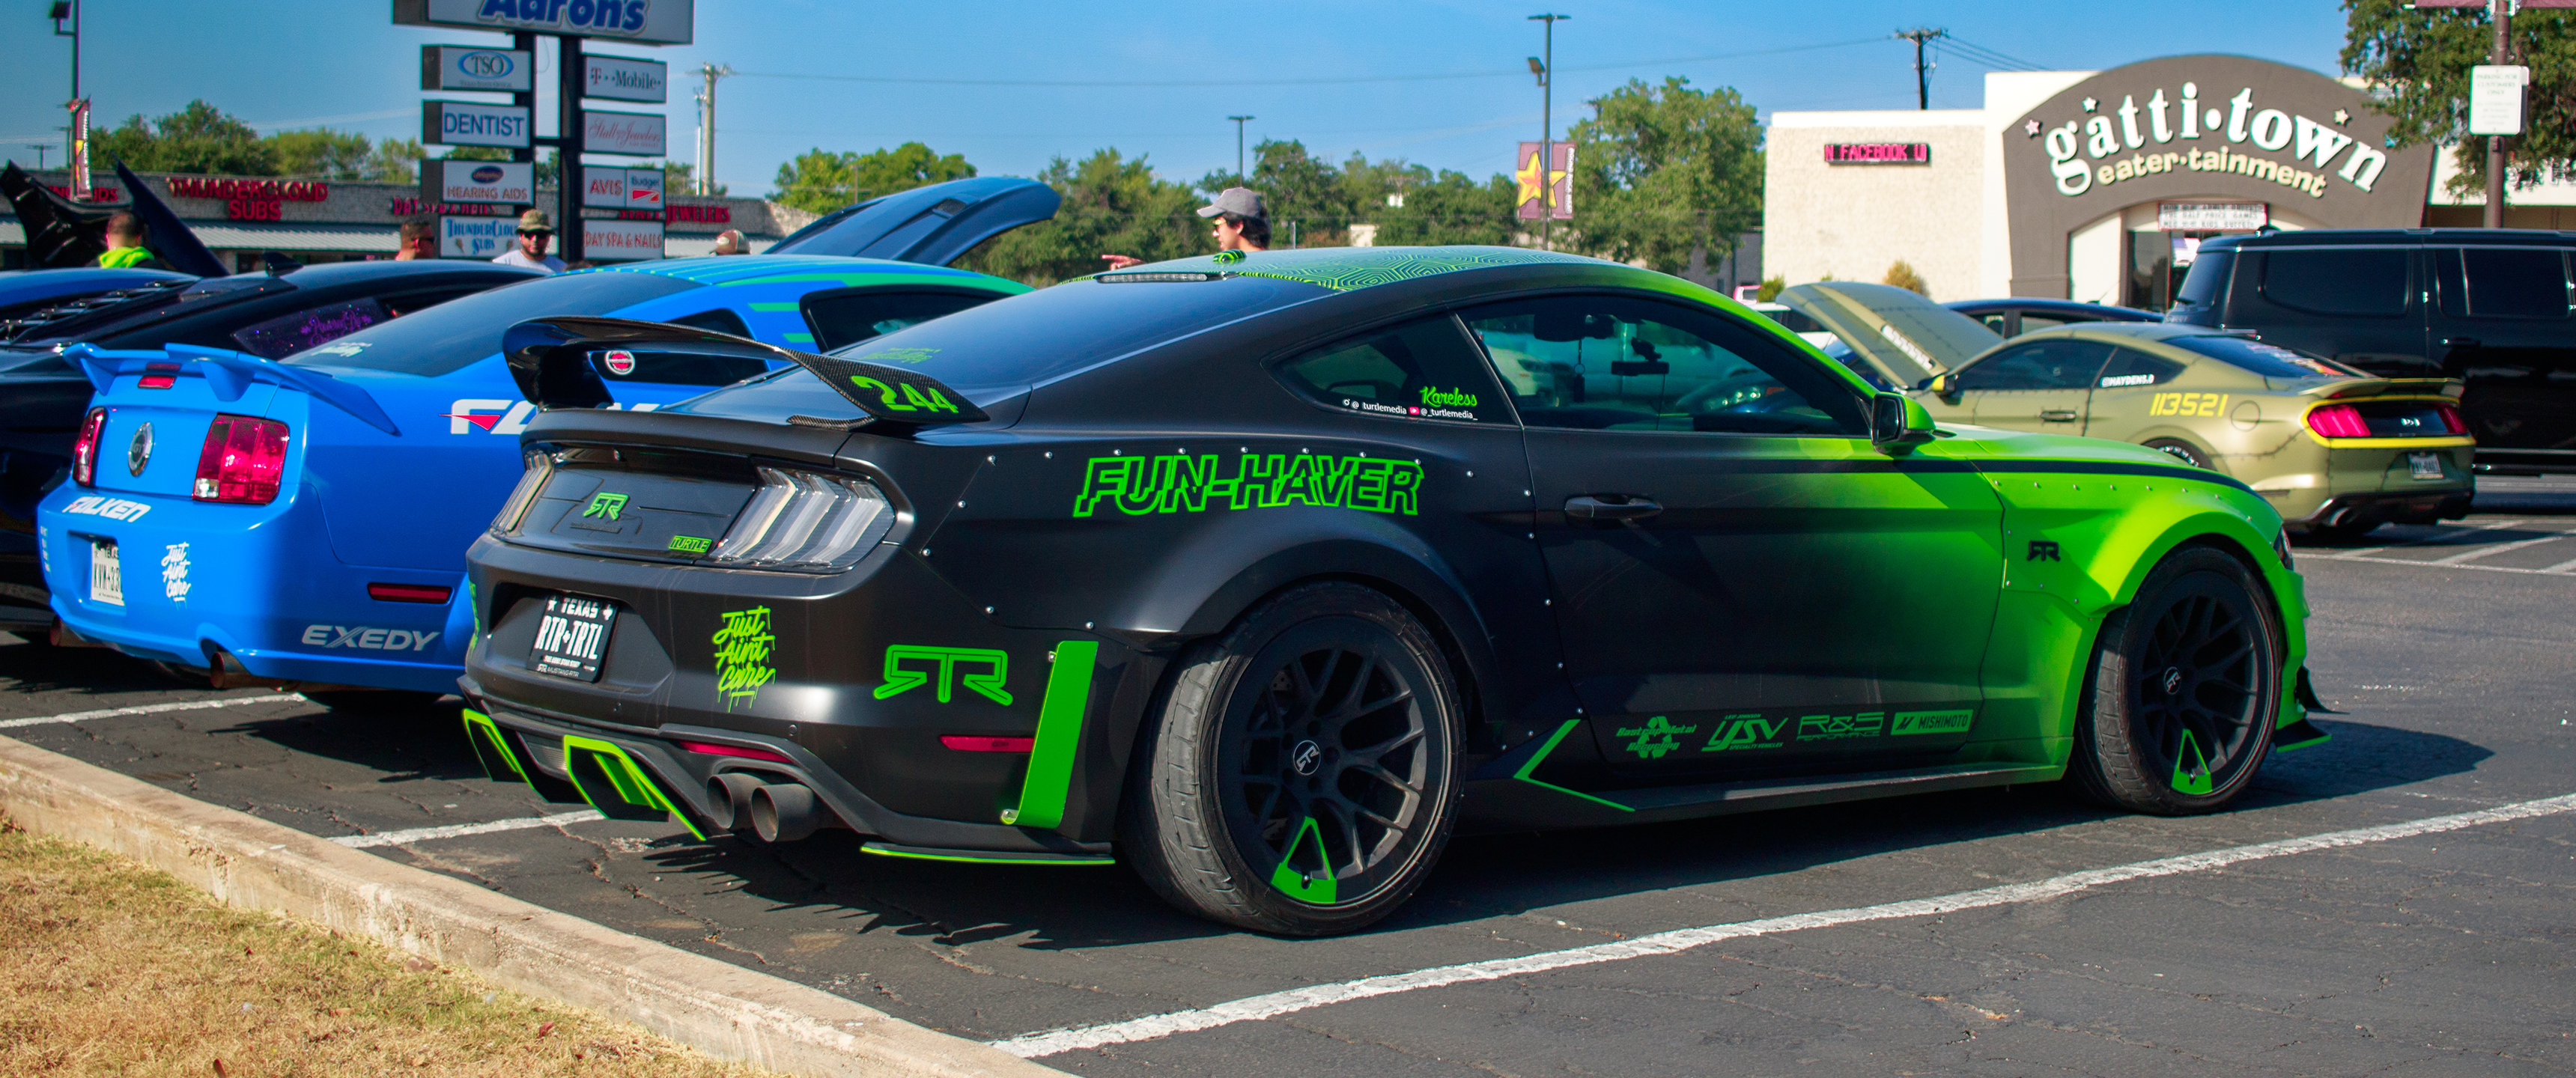 Car Ford Mustang Widebody Ford Mustang RTR Sunlight Rear View Gradient Vehicle Trees 3440x1440